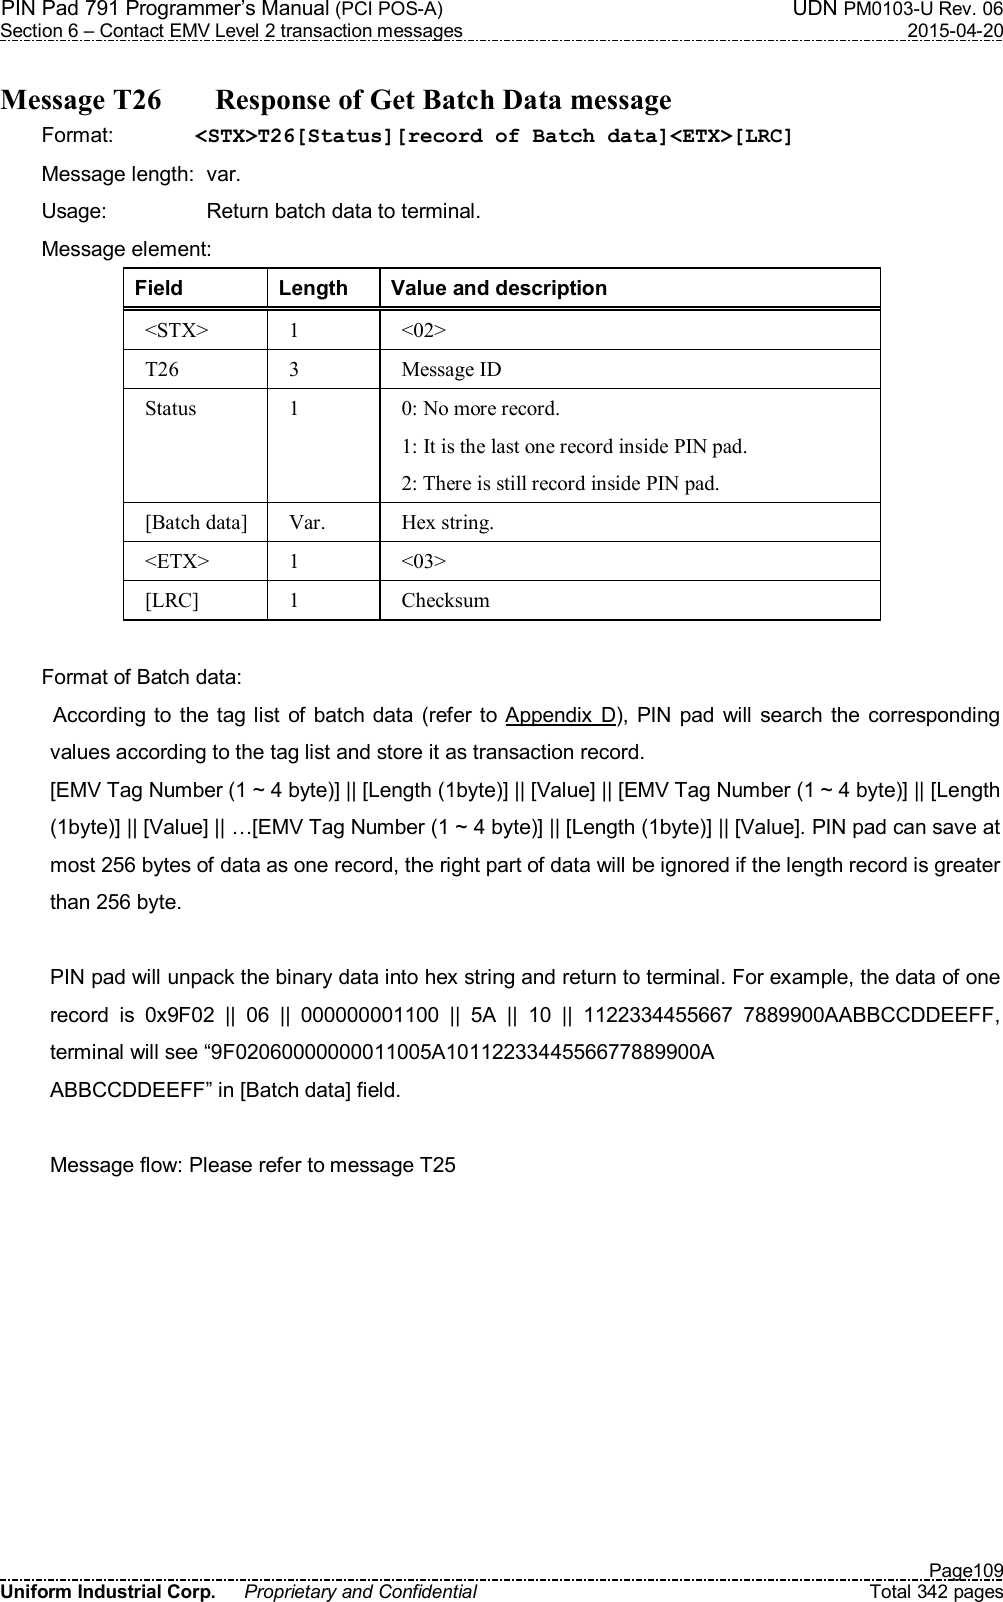 PIN Pad 791 Programmer’s Manual (PCI POS-A)  UDN PM0103-U Rev. 06 Section 6 – Contact EMV Level 2 transaction messages  2015-04-20   Page109 Uniform Industrial Corp.  Proprietary and Confidential  Total 342 pages  Message T26    Response of Get Batch Data message Format:  &lt;STX&gt;T26[Status][record of Batch data]&lt;ETX&gt;[LRC] Message length:  var. Usage:  Return batch data to terminal. Message element:   Field  Length  Value and description &lt;STX&gt;  1  &lt;02&gt; T26  3  Message ID Status  1  0: No more record. 1: It is the last one record inside PIN pad. 2: There is still record inside PIN pad. [Batch data]  Var.  Hex string. &lt;ETX&gt;  1  &lt;03&gt; [LRC]  1  Checksum  Format of Batch data: According to the tag list of  batch  data (refer to Appendix  D), PIN pad will  search  the  corresponding values according to the tag list and store it as transaction record. [EMV Tag Number (1 ~ 4 byte)] || [Length (1byte)] || [Value] || [EMV Tag Number (1 ~ 4 byte)] || [Length (1byte)] || [Value] || …[EMV Tag Number (1 ~ 4 byte)] || [Length (1byte)] || [Value]. PIN pad can save at most 256 bytes of data as one record, the right part of data will be ignored if the length record is greater than 256 byte.  PIN pad will unpack the binary data into hex string and return to terminal. For example, the data of one record  is  0x9F02  ||  06  ||  000000001100  ||  5A  ||  10  ||  1122334455667  7889900AABBCCDDEEFF, terminal will see “9F02060000000011005A1011223344556677889900A ABBCCDDEEFF” in [Batch data] field.  Message flow: Please refer to message T25  